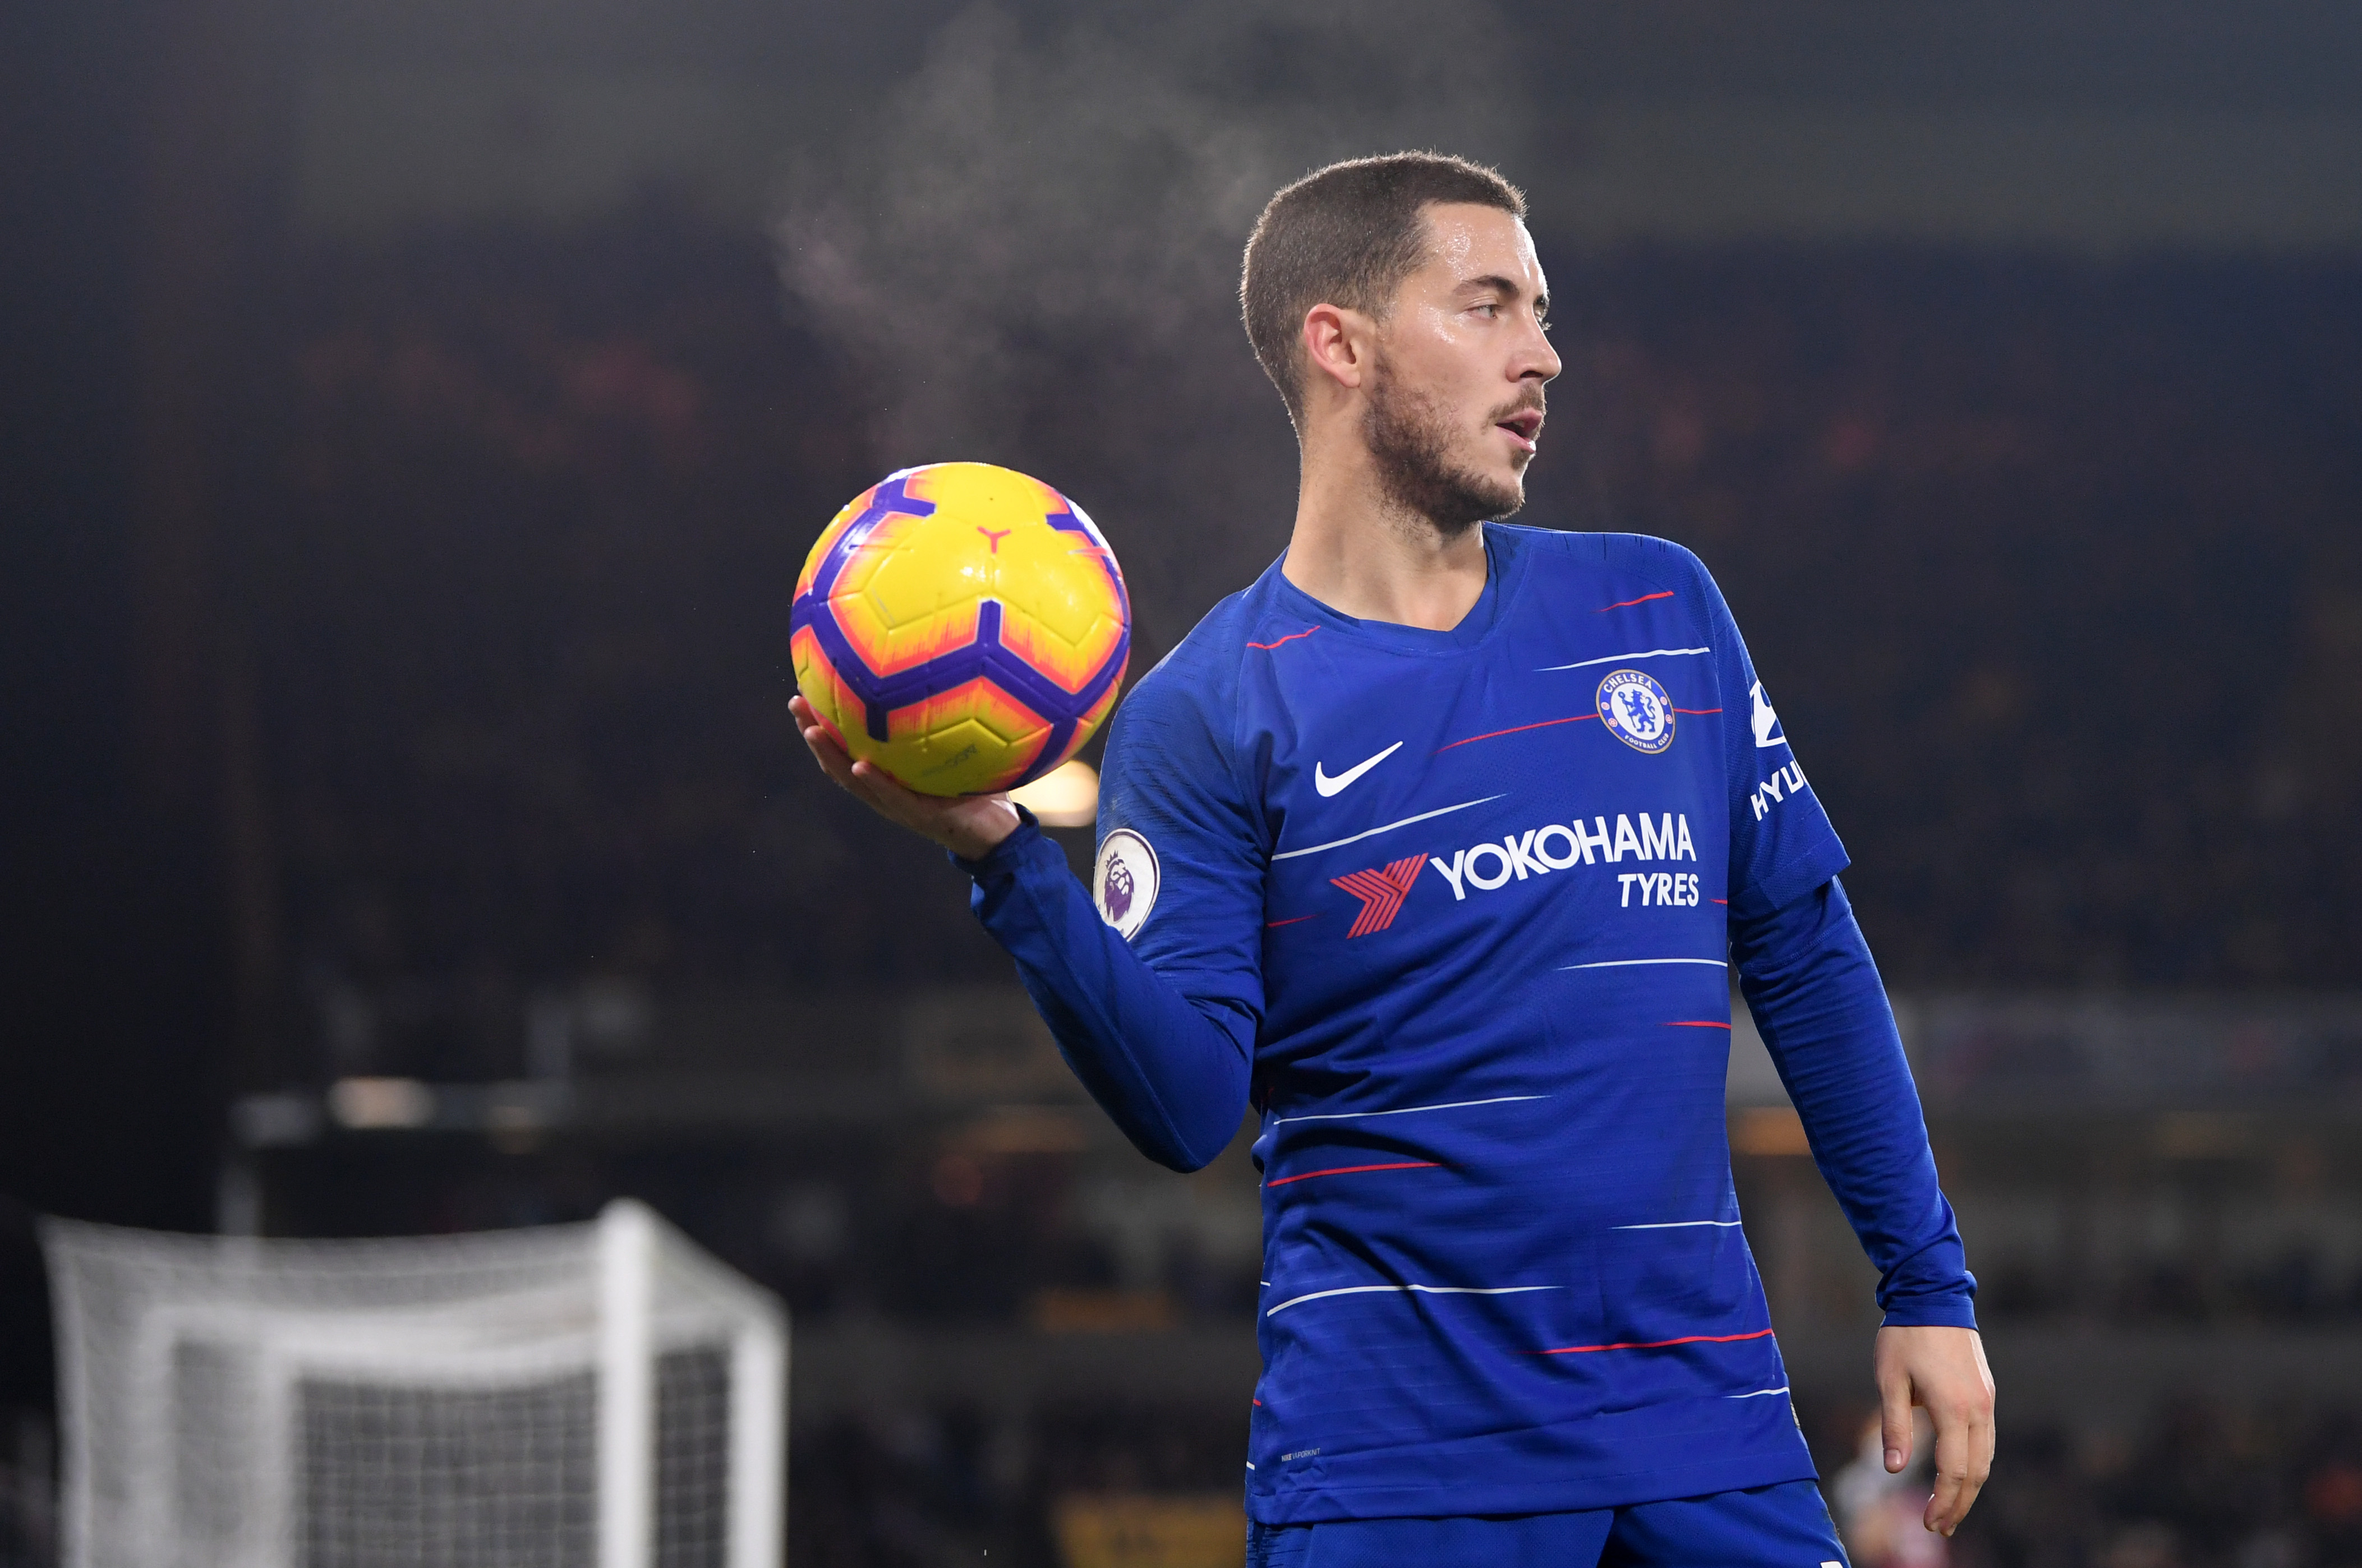 WOLVERHAMPTON, ENGLAND - DECEMBER 05:  Eden Hazard of Chelsea holds the ball during the Premier League match between Wolverhampton Wanderers and Chelsea FC at Molineux on December 5, 2018 in Wolverhampton, United Kingdom.  (Photo by Laurence Griffiths/Getty Images)